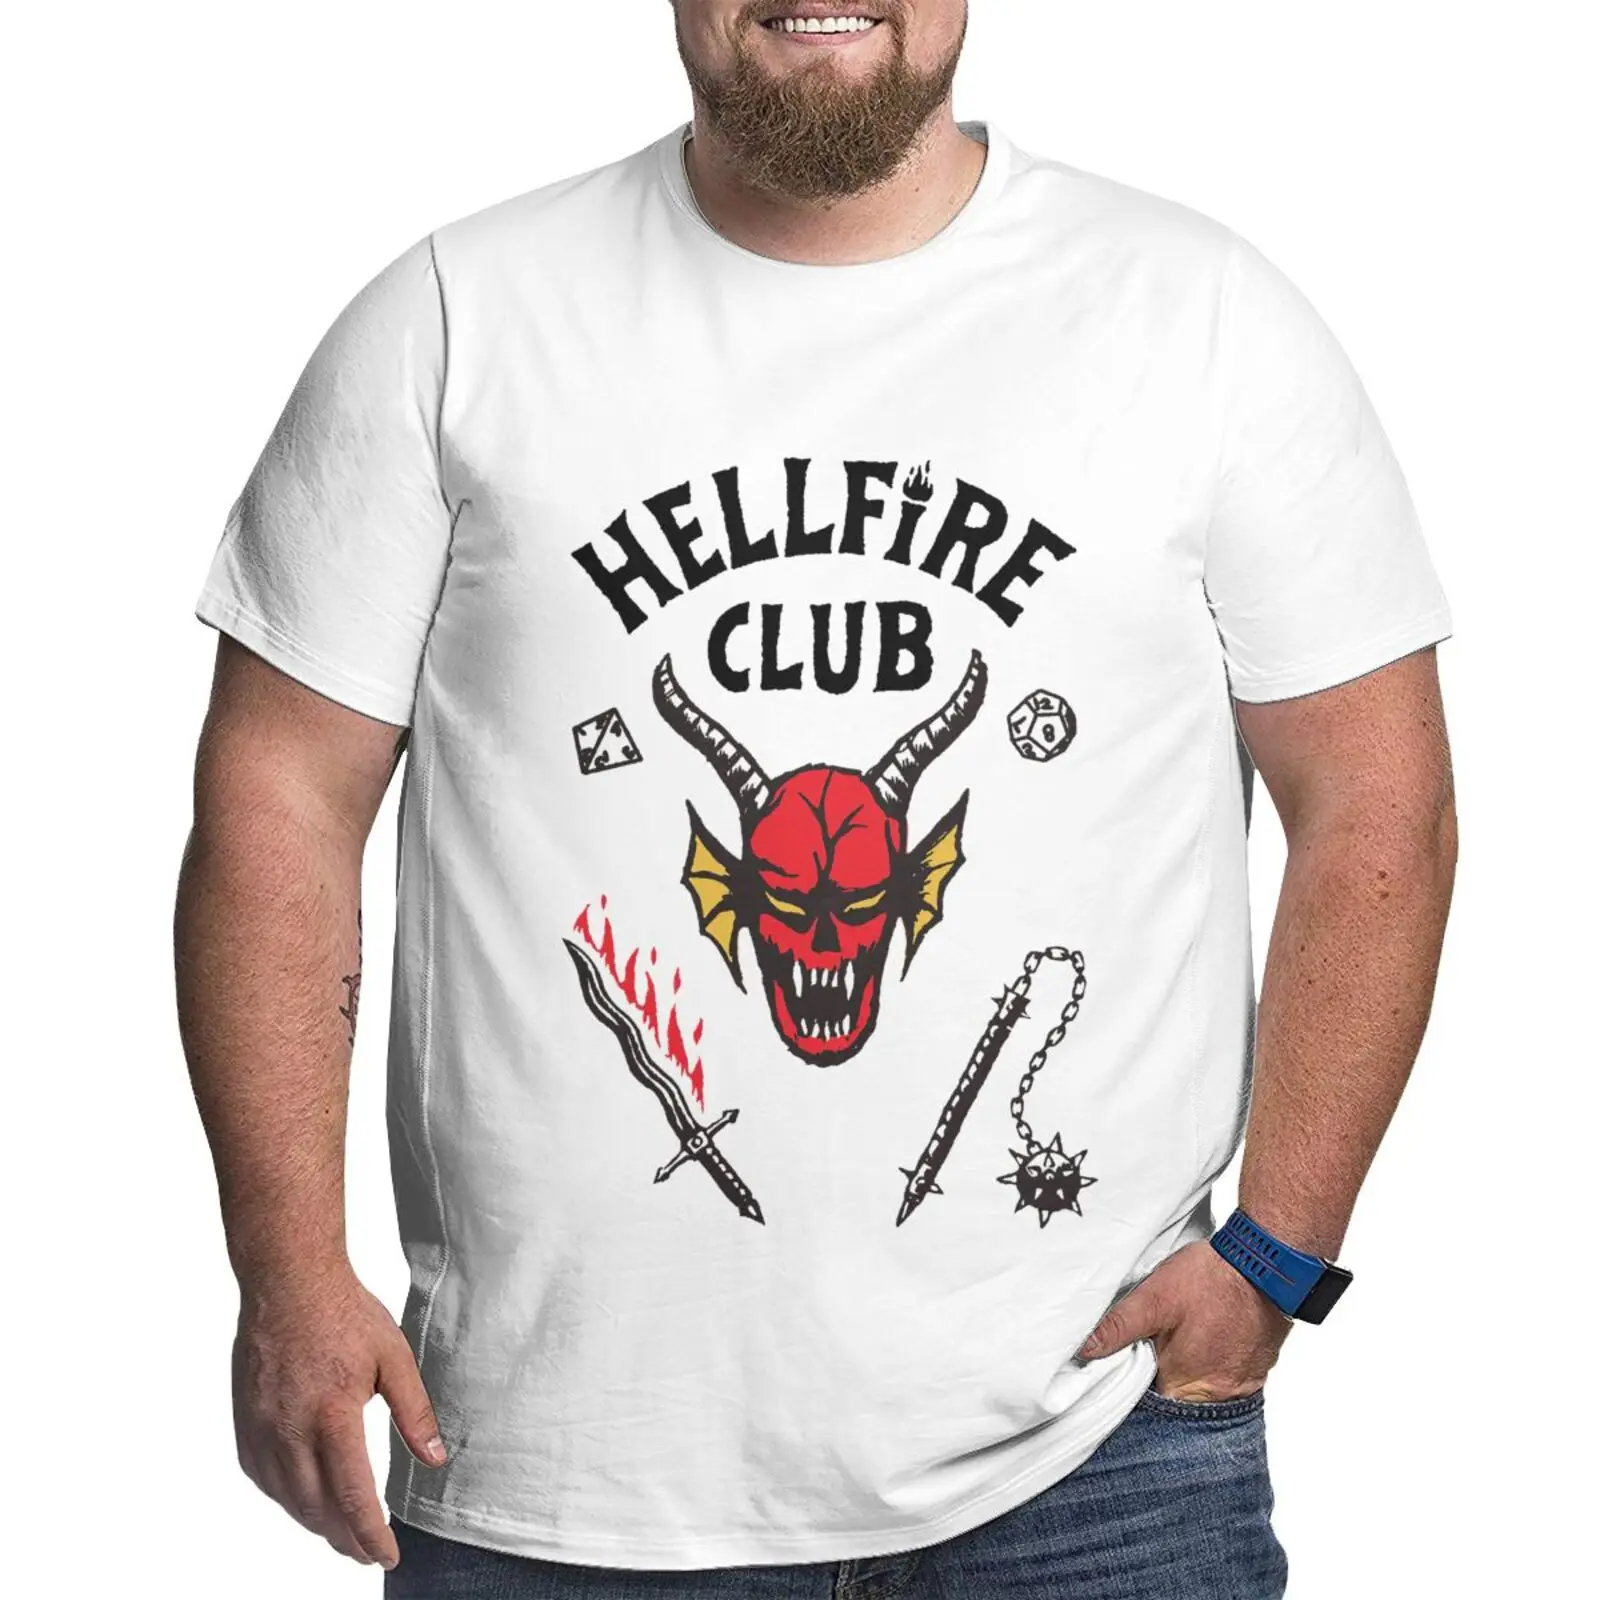 

Hell Fire Clubs Shirt for Men Plus Size T-Shirts Big and Tall Man Top Tees 1XL-6XL Stranger Things Graphic Tshirts